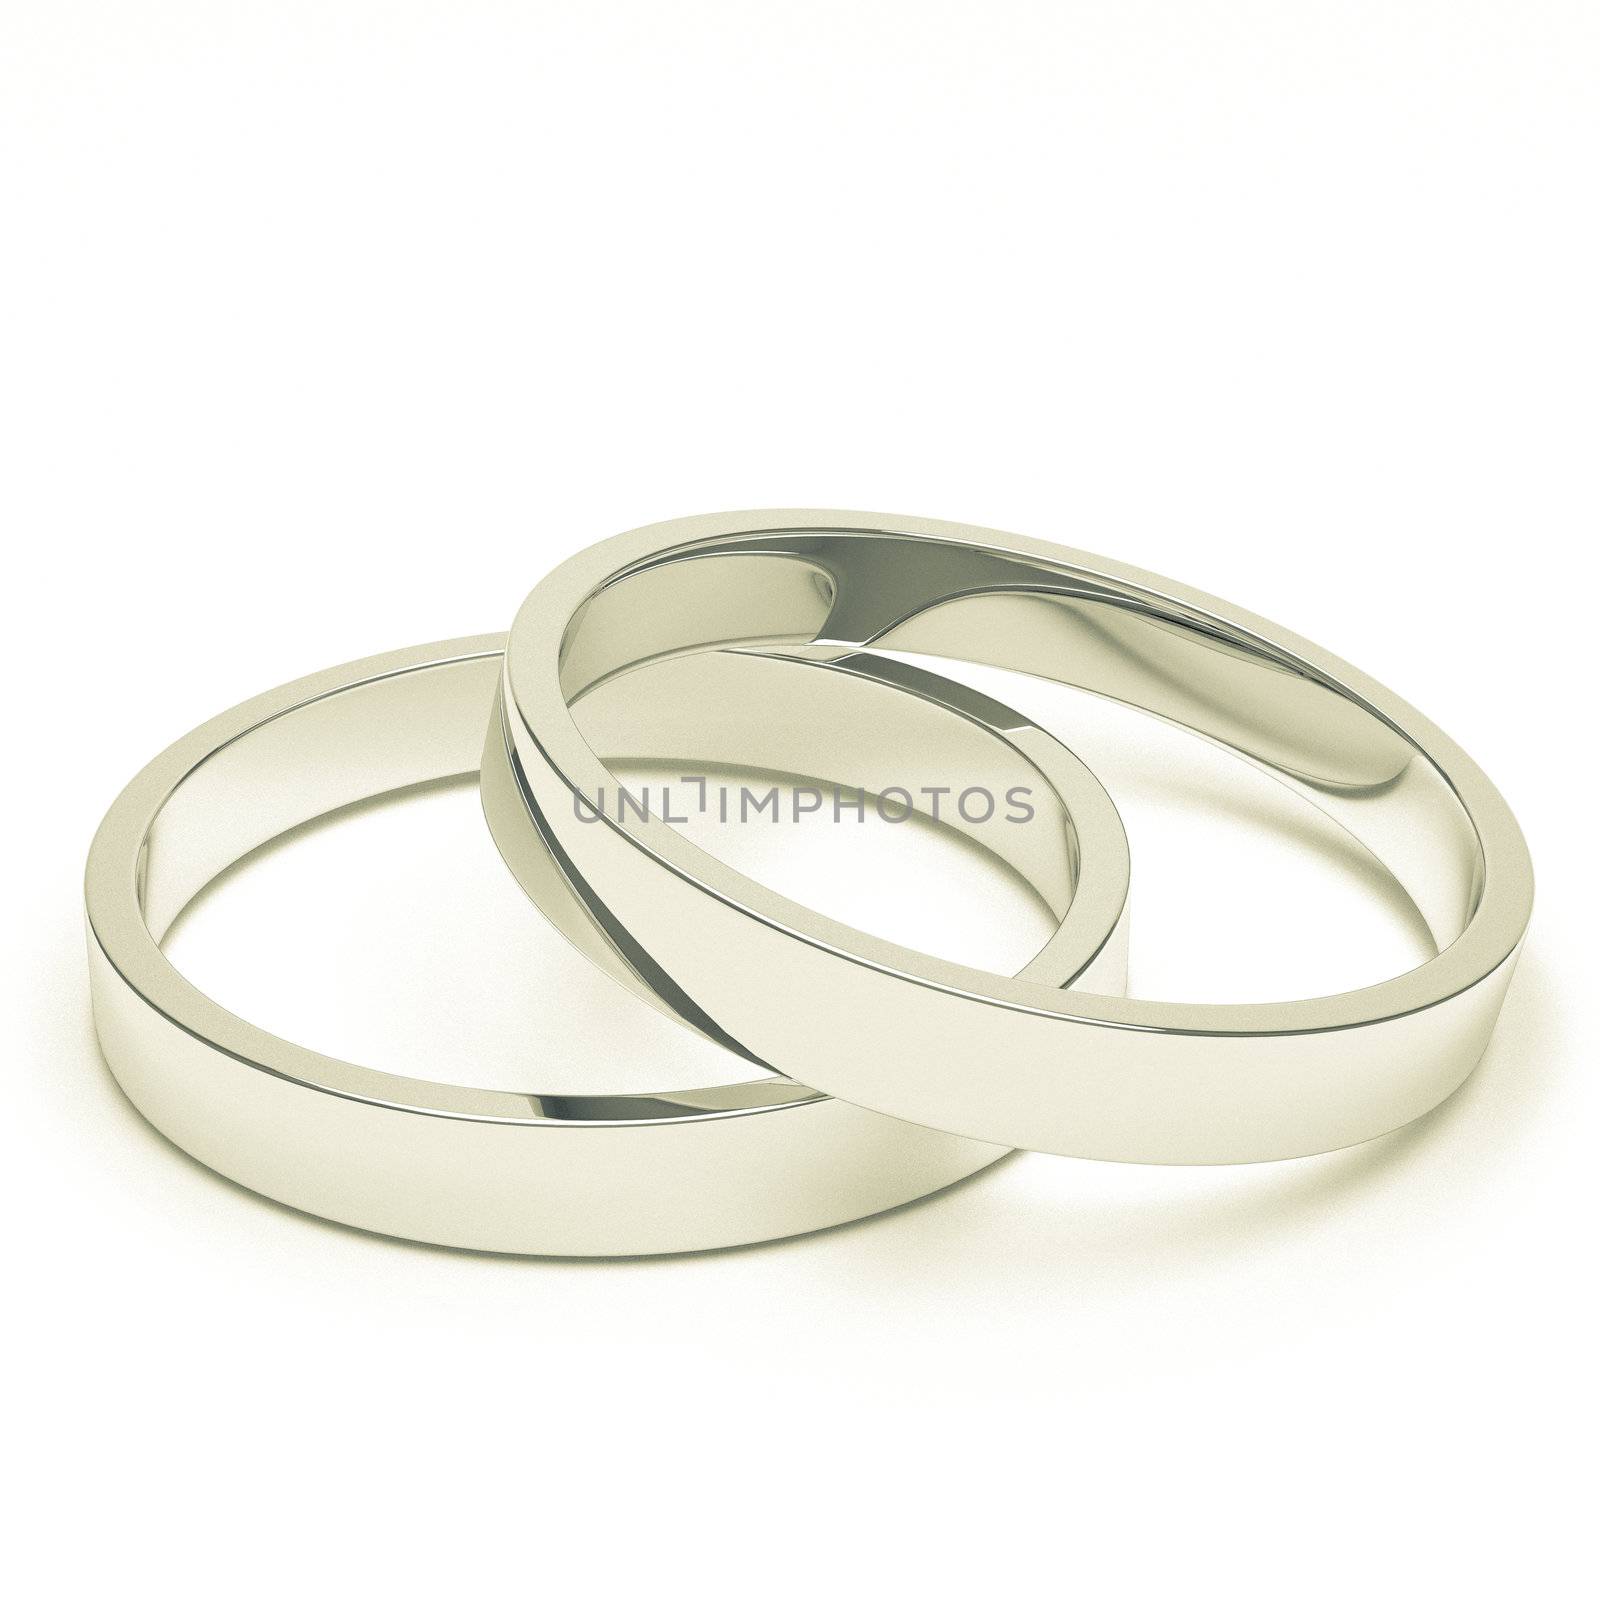 A pair of isolated silver or platinum weddings rings.